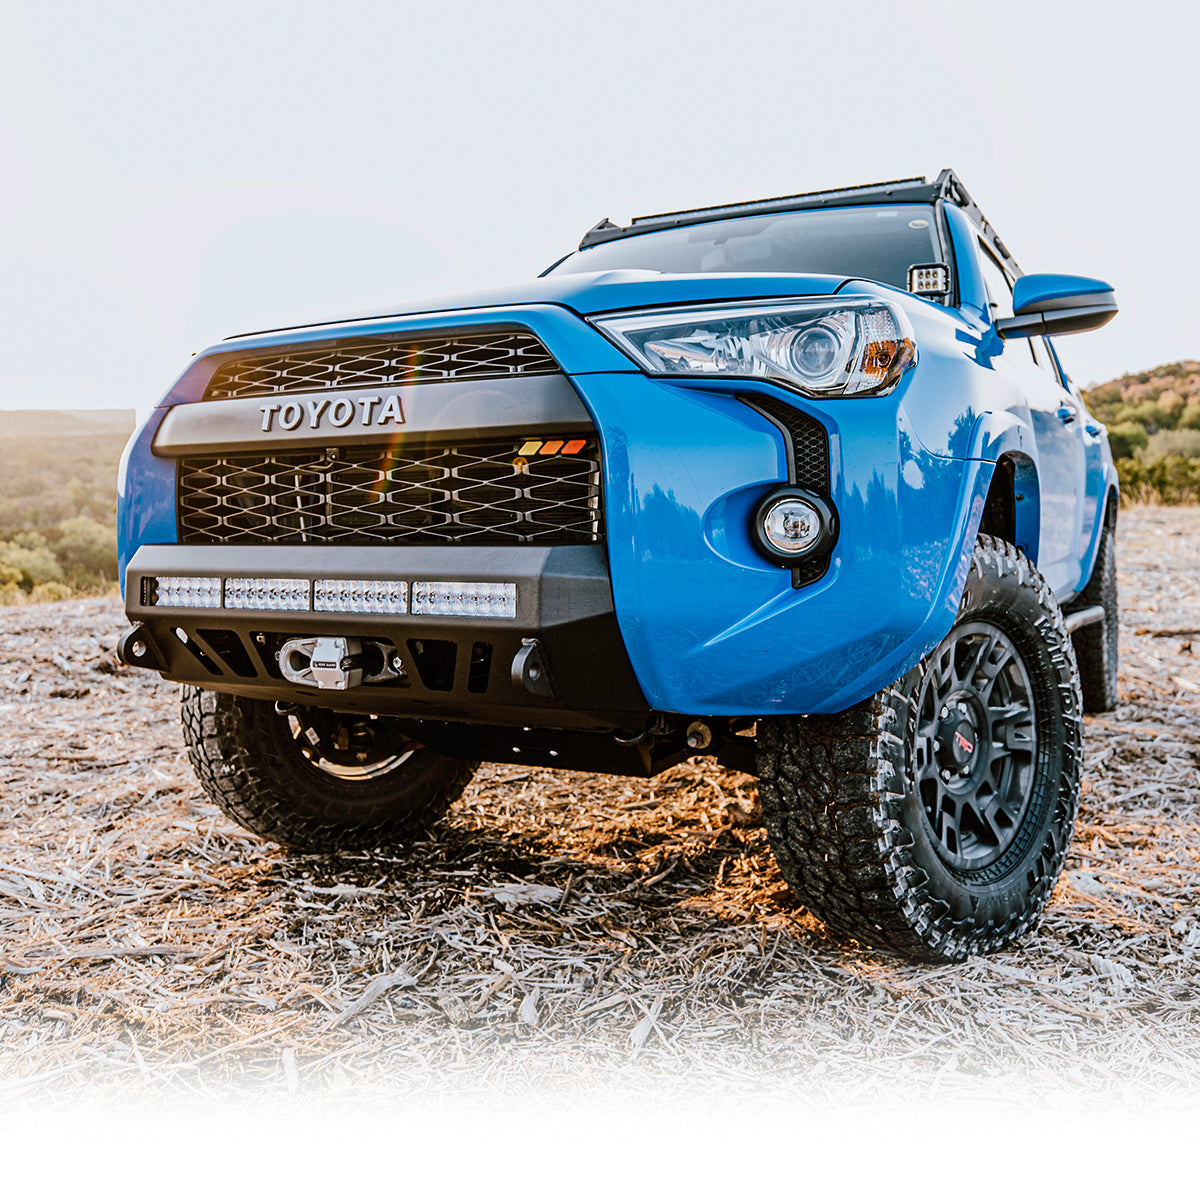 Stealth Bumper Fits 2014+ 4Runner - 32in LED BAR (SPOT BEAM) // BUMPER LIGHT BAR - BLUE - SMALL // NO Winch // 3/4in D-Ring Shackle with Isolator - PAIR